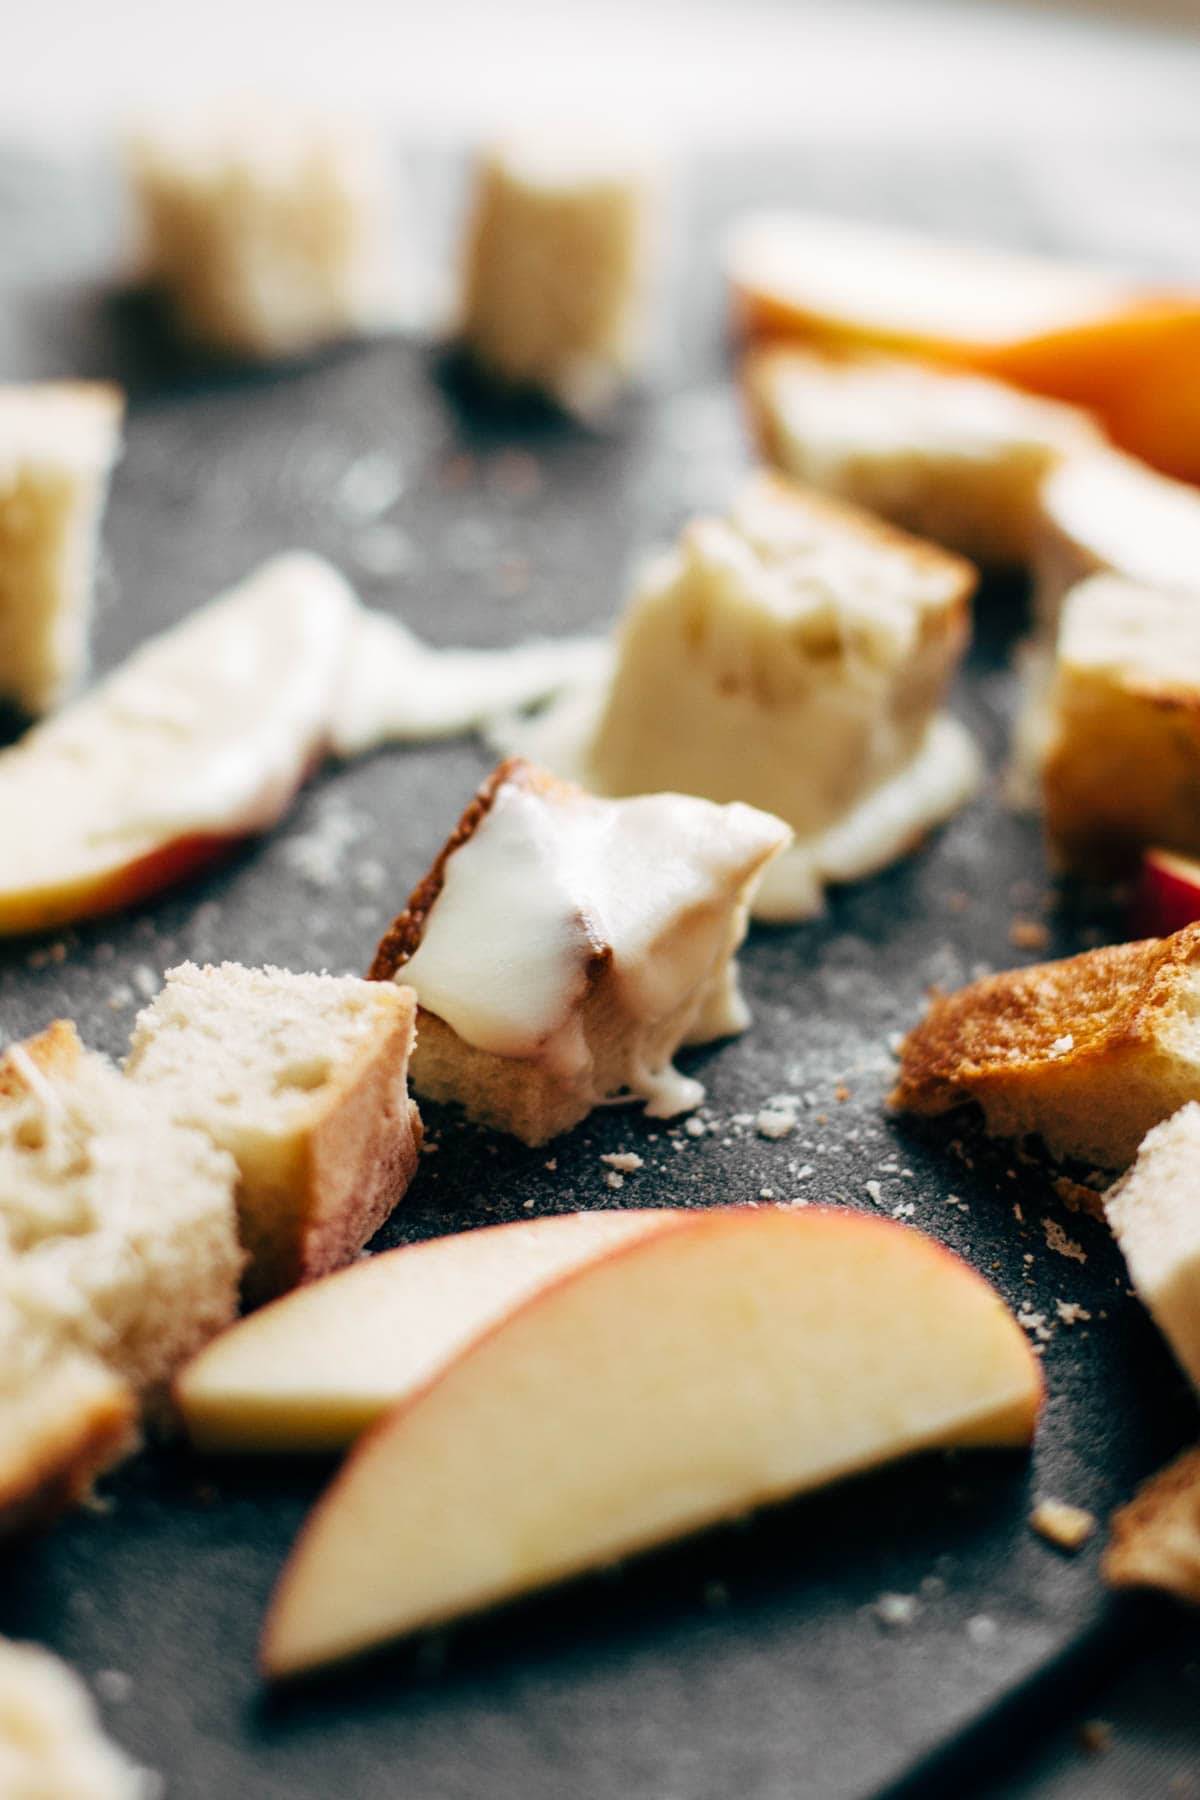 bread and apples for cheese fondue